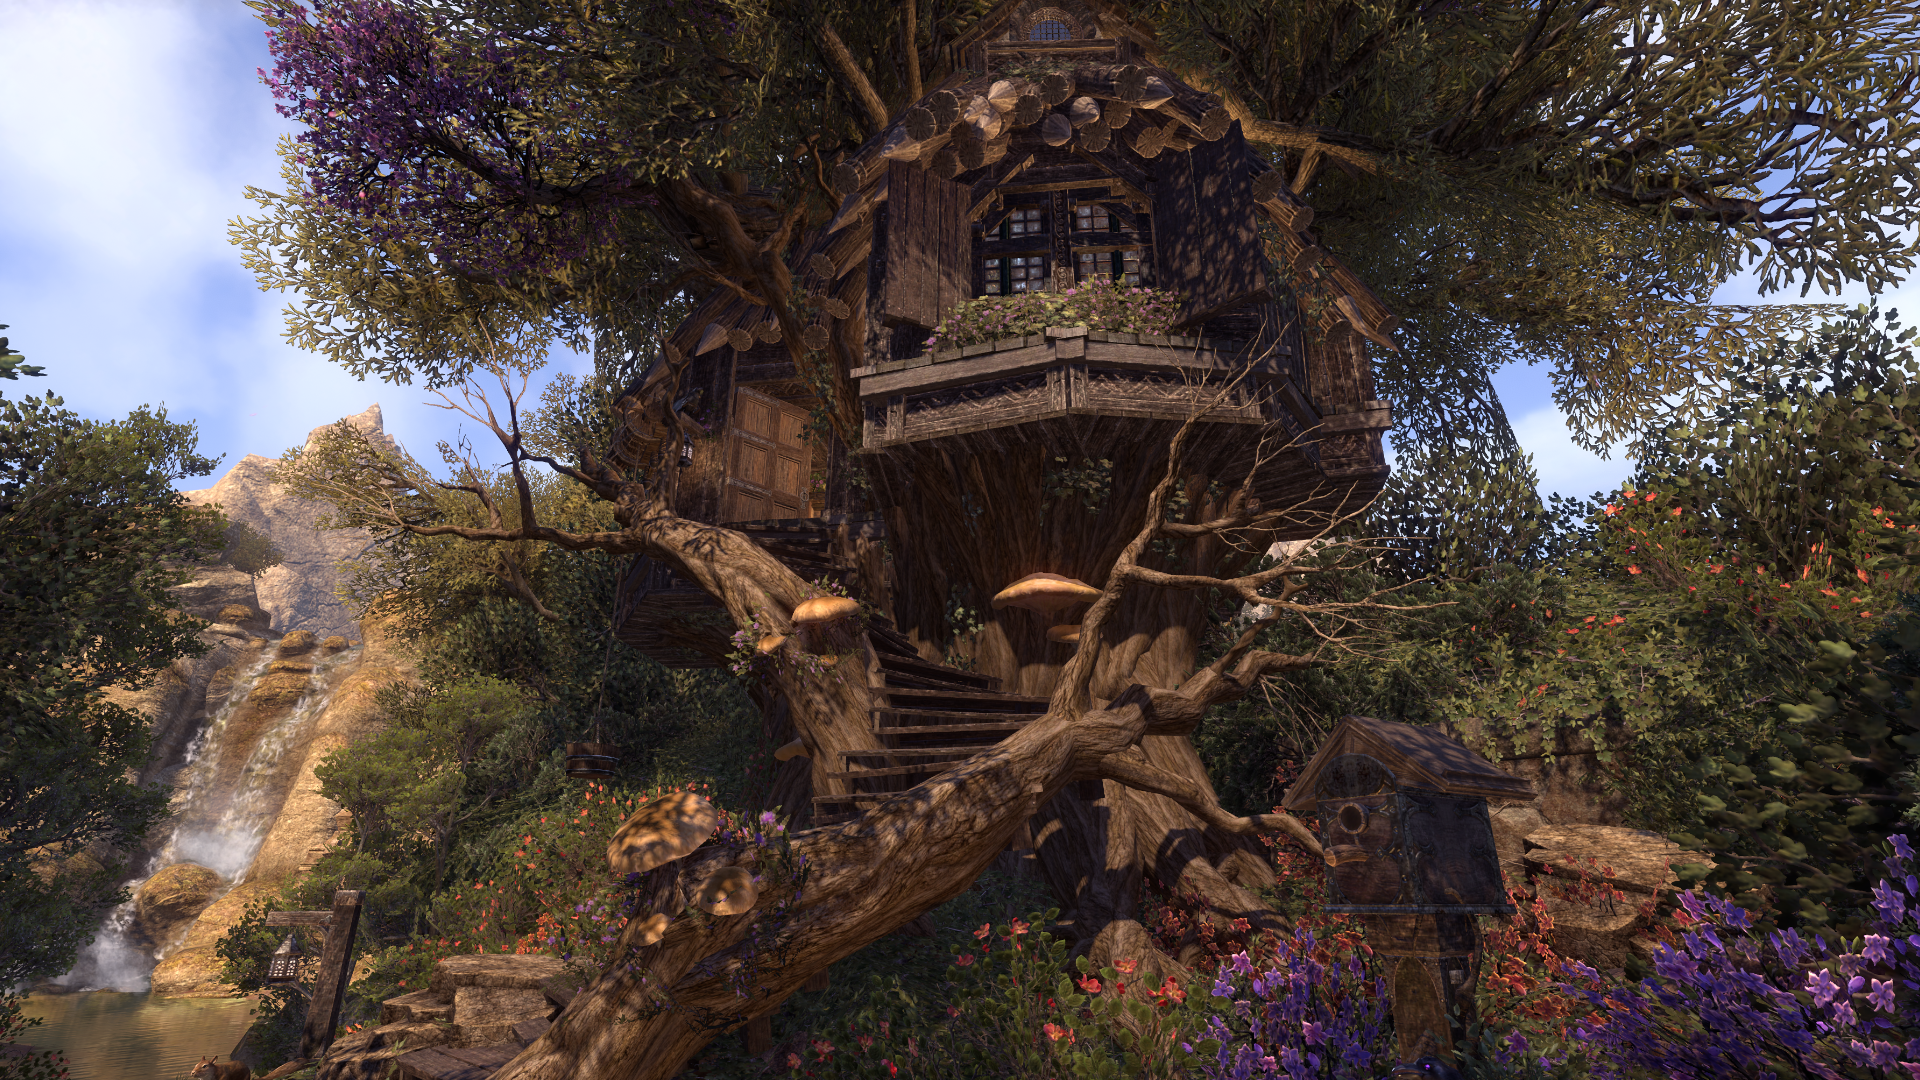 An image of a beautiful treehouse rendered in The Elder Scrolls online.